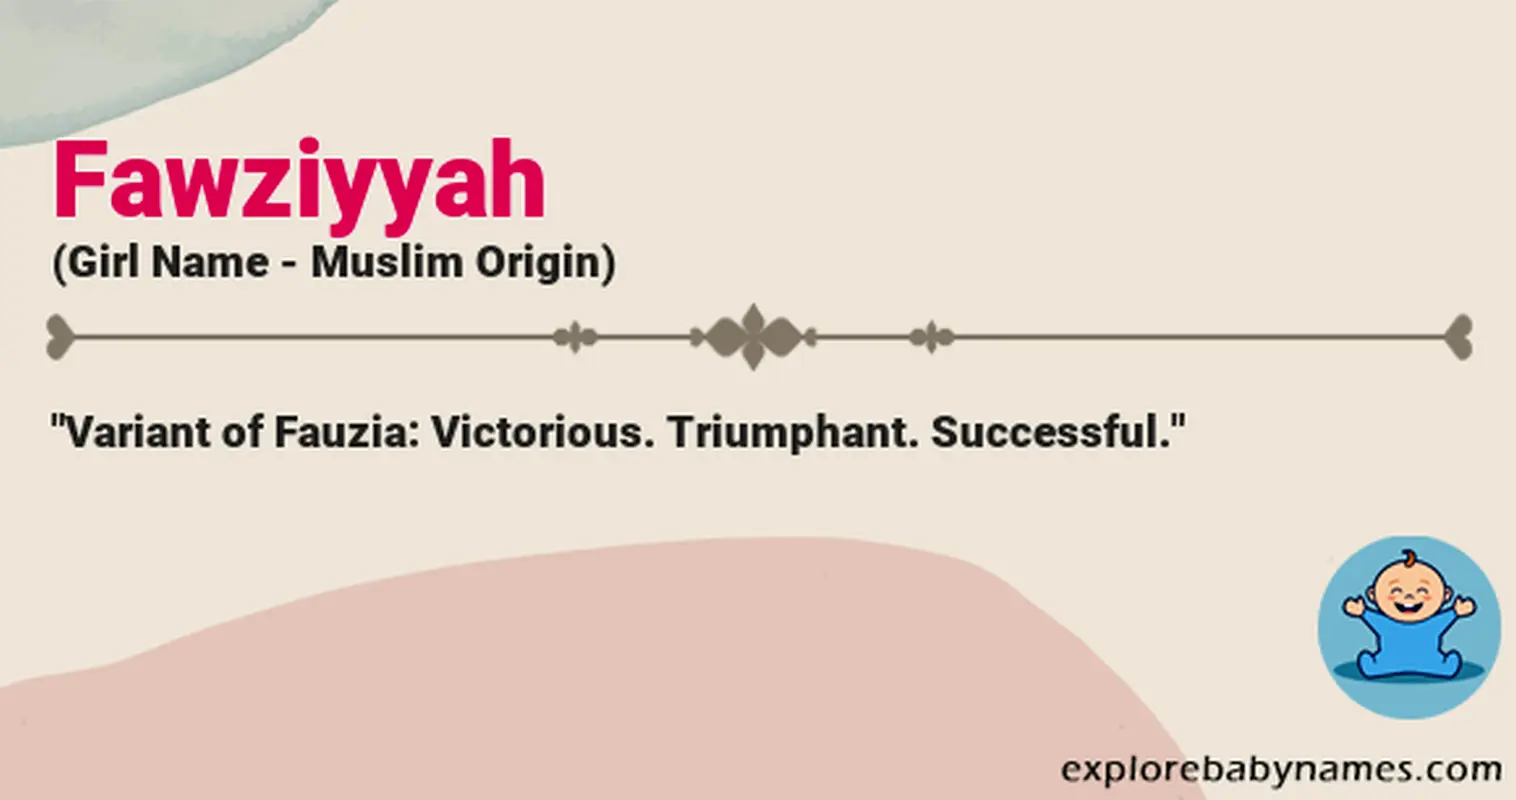 Meaning of Fawziyyah